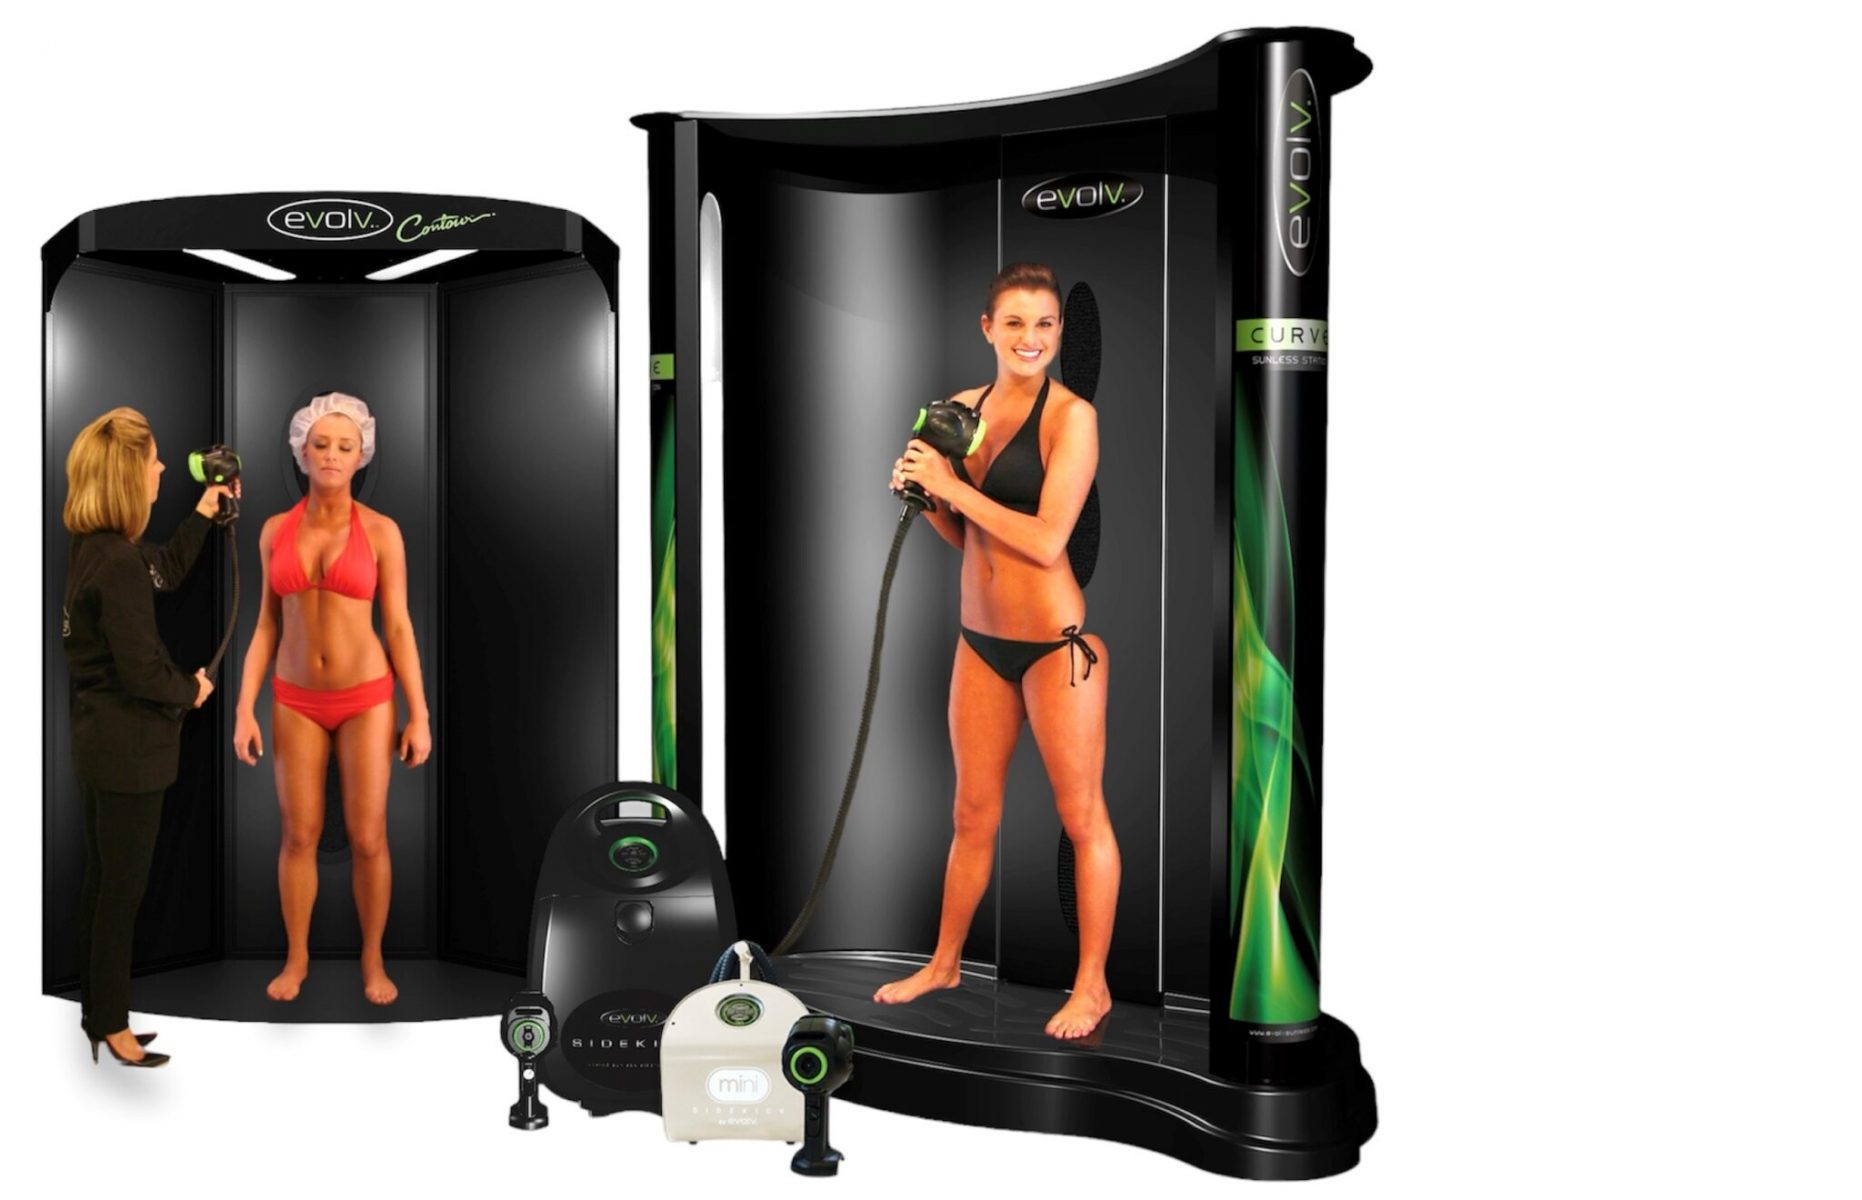 models getting a Heated Airbrush tan inside one of each Evolv Backdrops